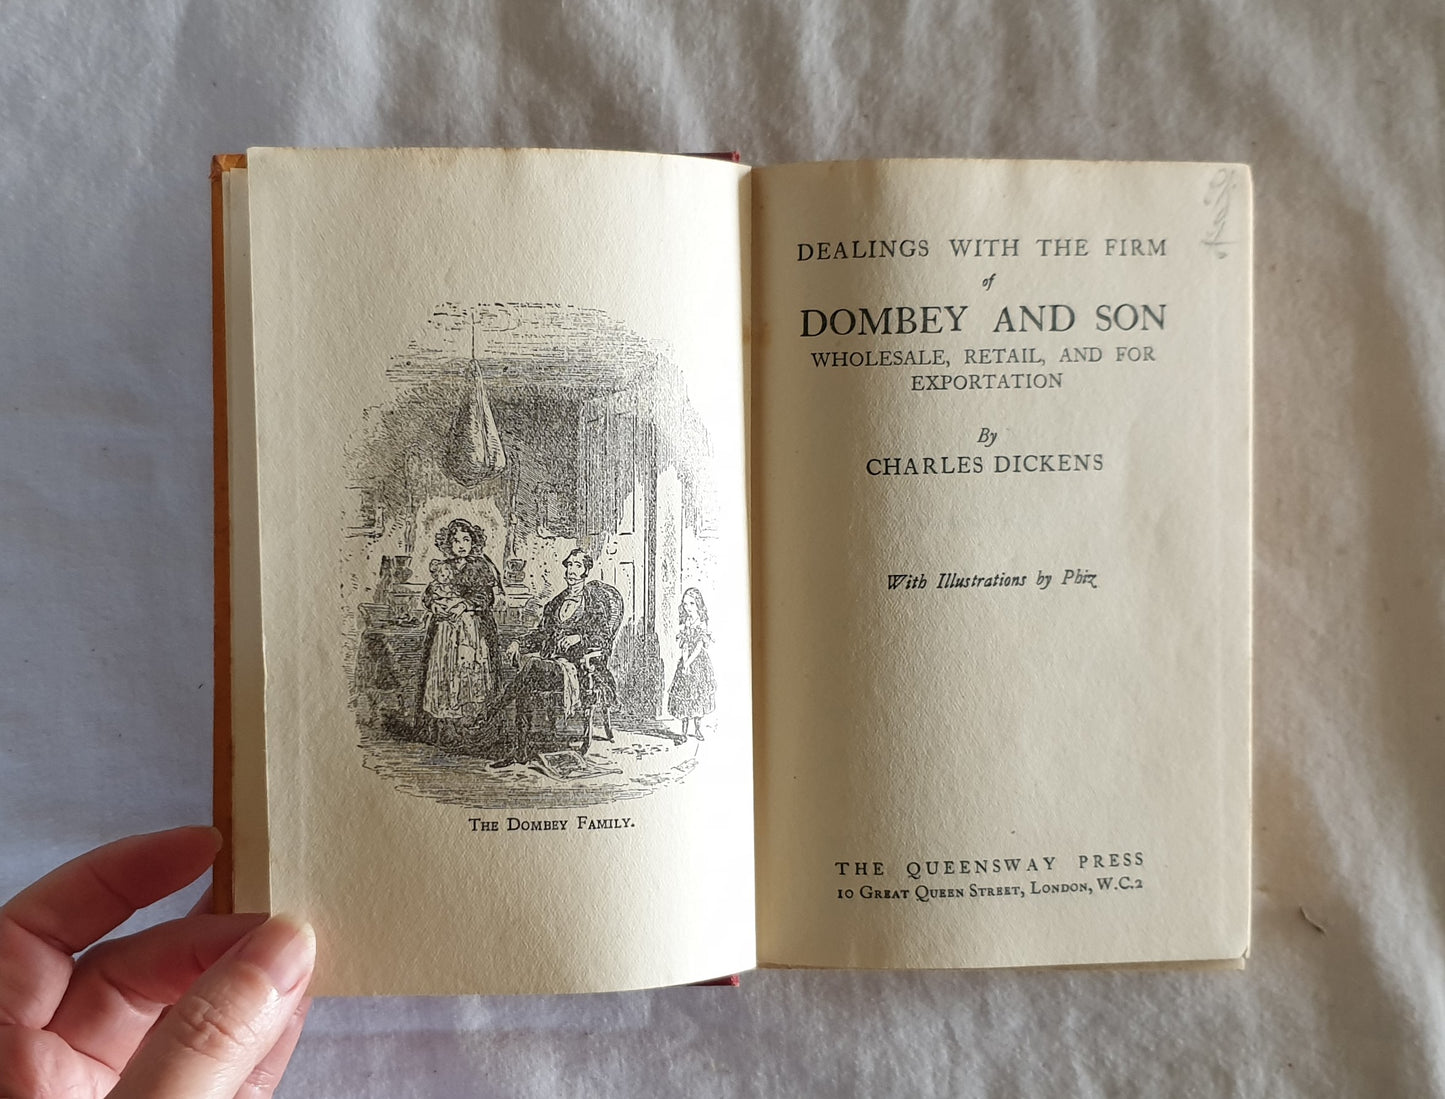 Dealings With The Firm of Dombey and Son by Charles Dickens